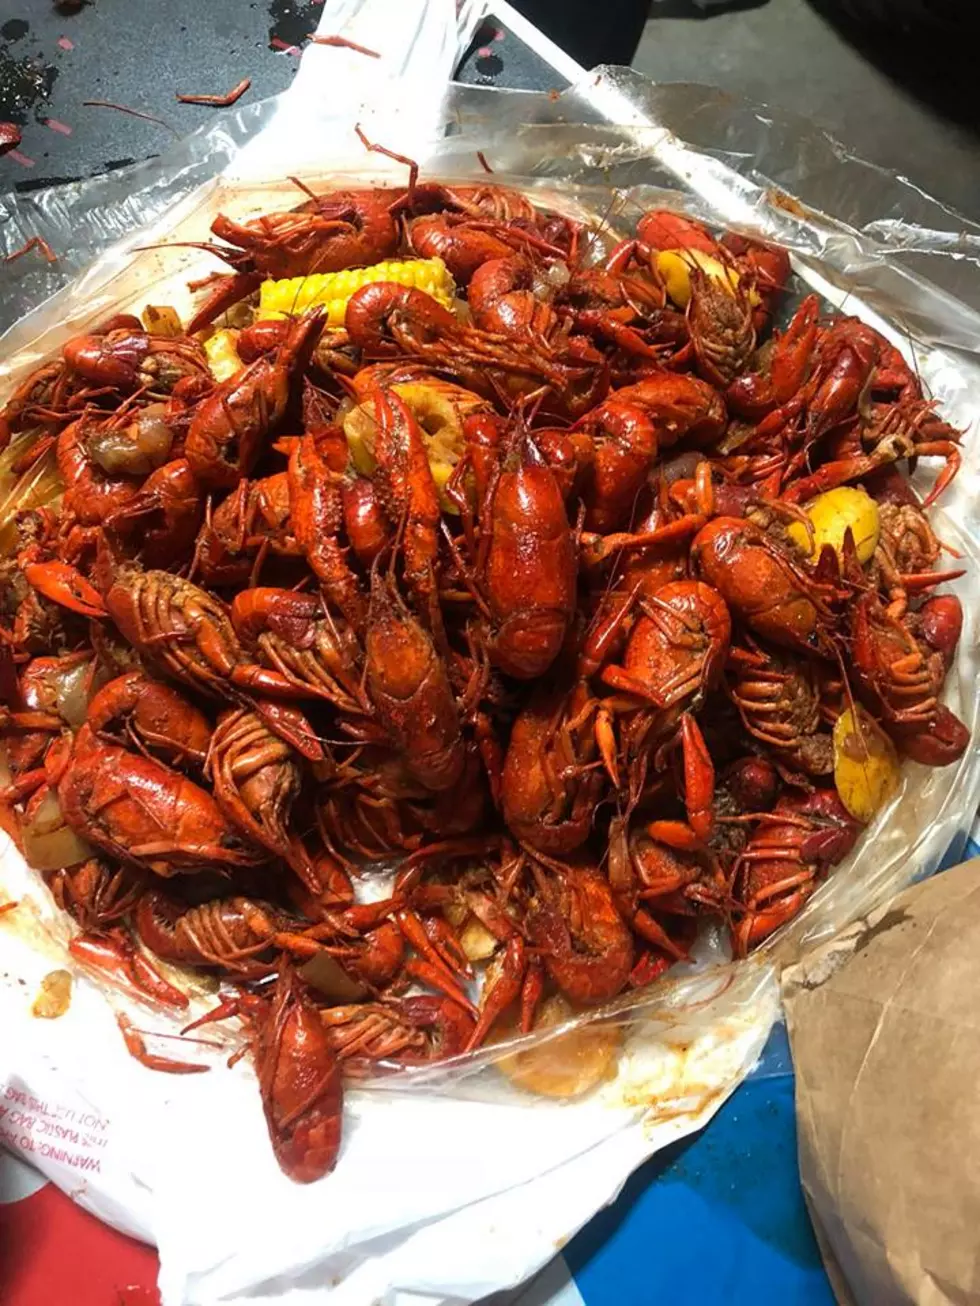 No Big Changes for Crawfish Prices This Week in Shreveport Bossier